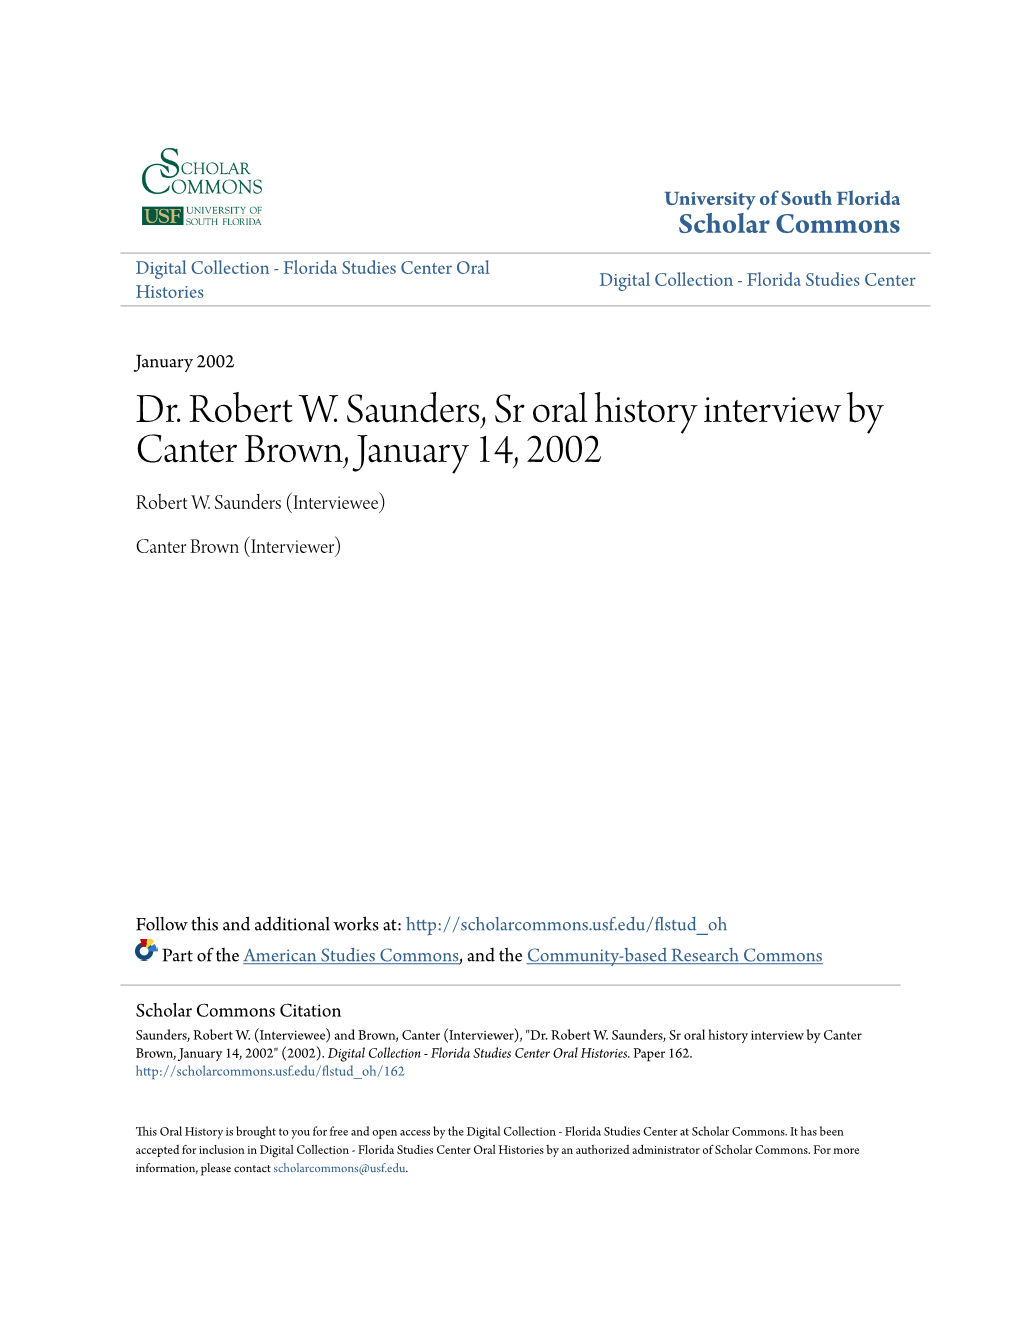 Dr. Robert W. Saunders, Sr Oral History Interview by Canter Brown, January 14, 2002 Robert W